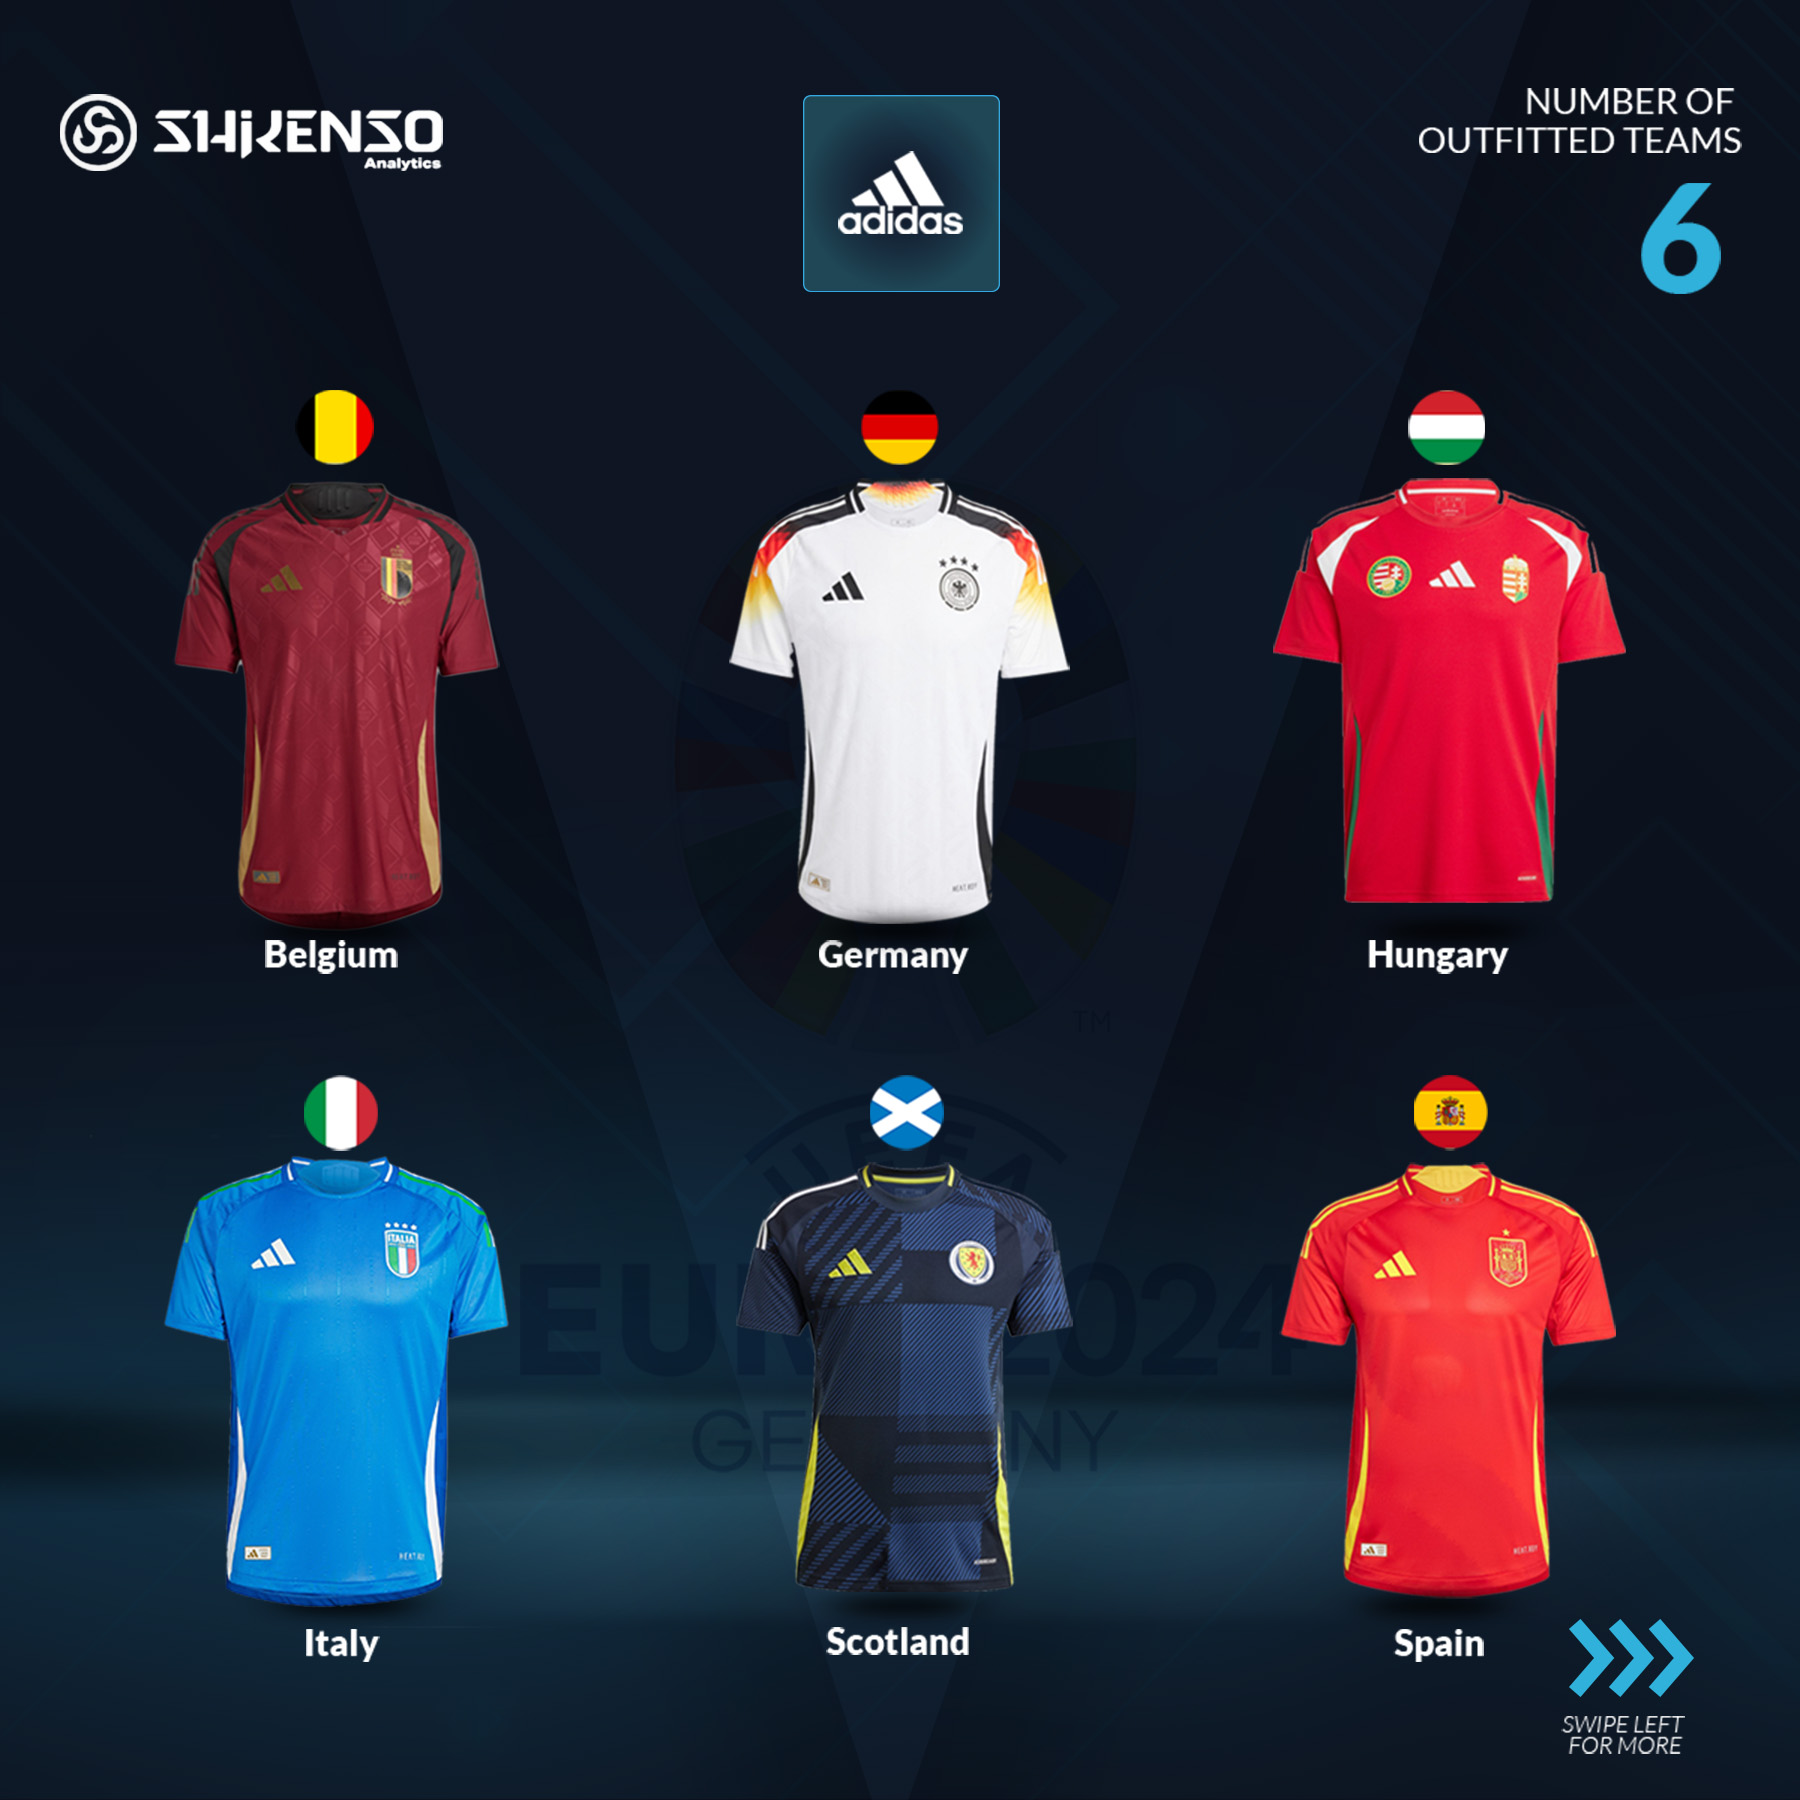 Overview of Adidas-sponsored national teams for EURO 2024, highlighting Adidas's role as a key outfitter for the tournament